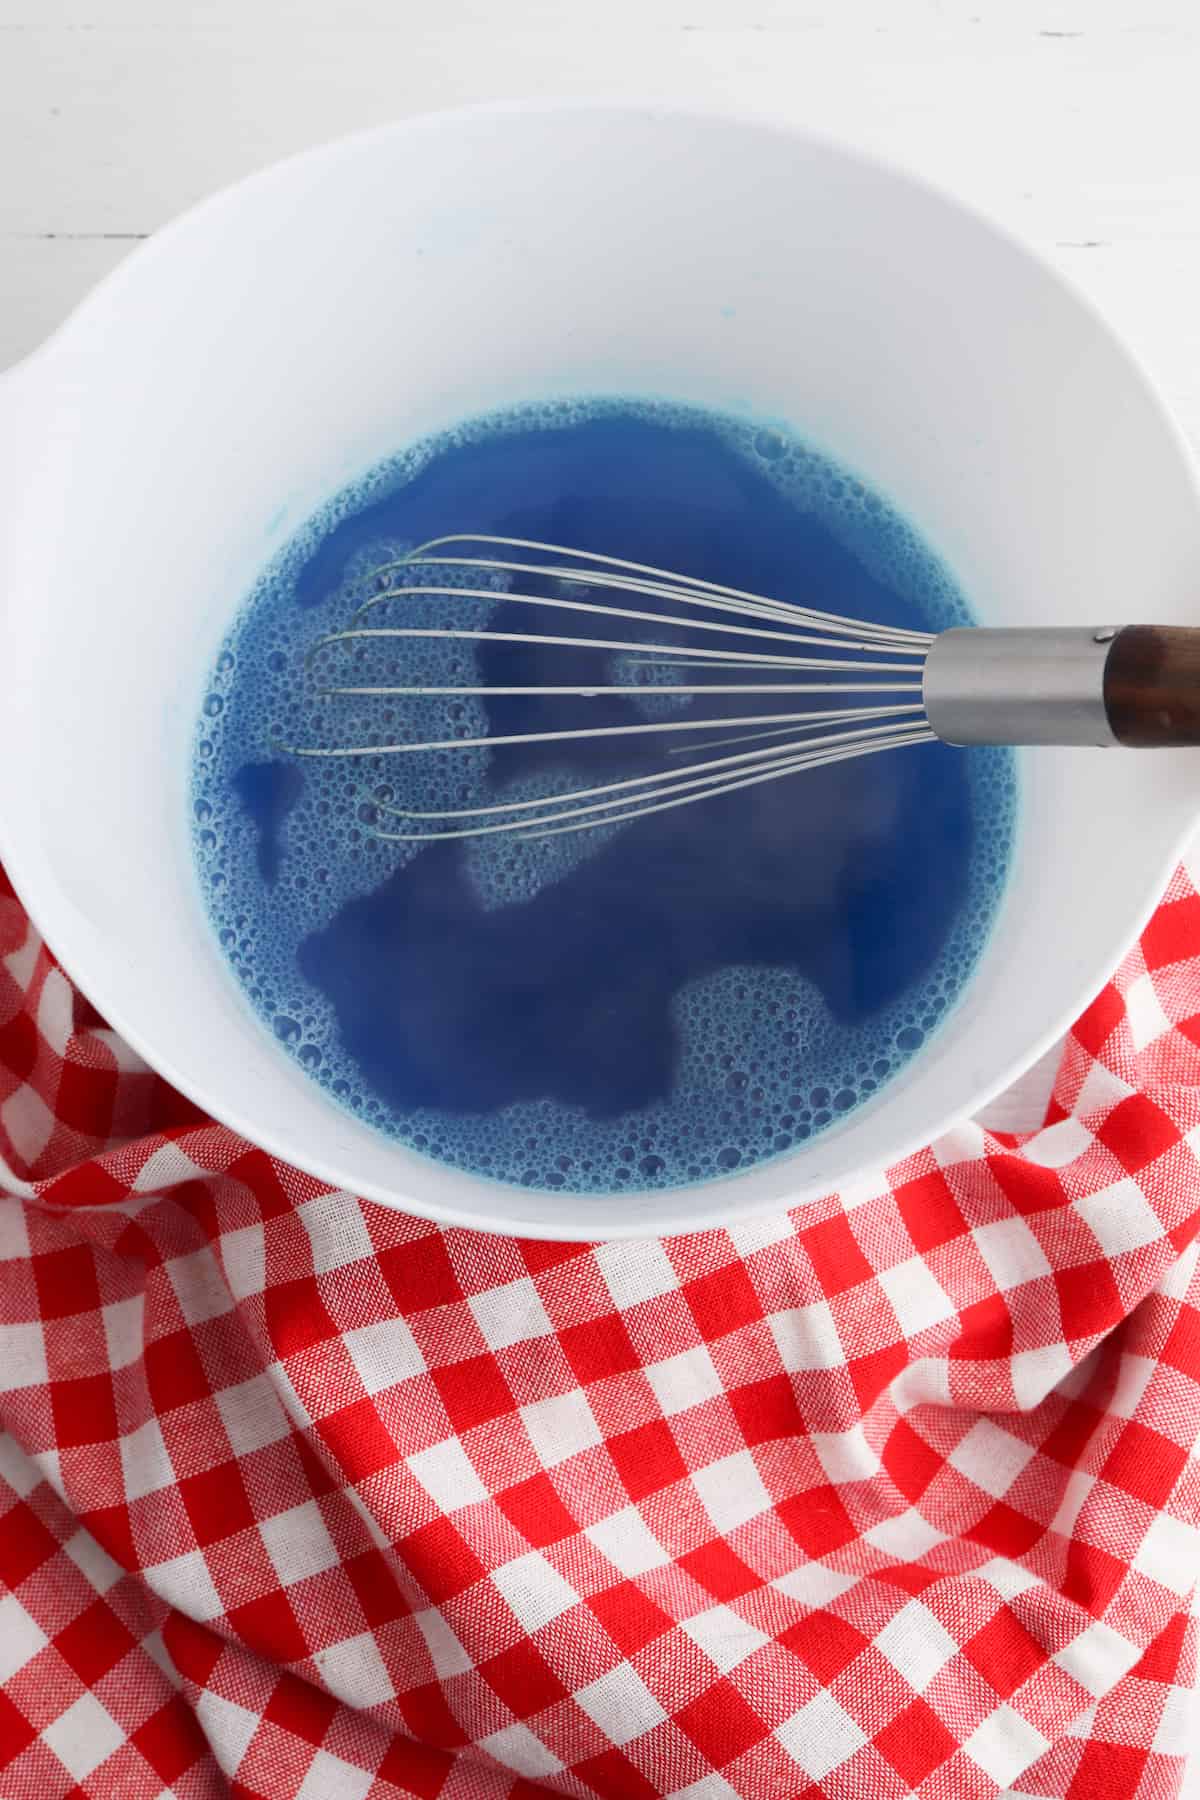 Blue jello in white bowl on red and white checked napkin.